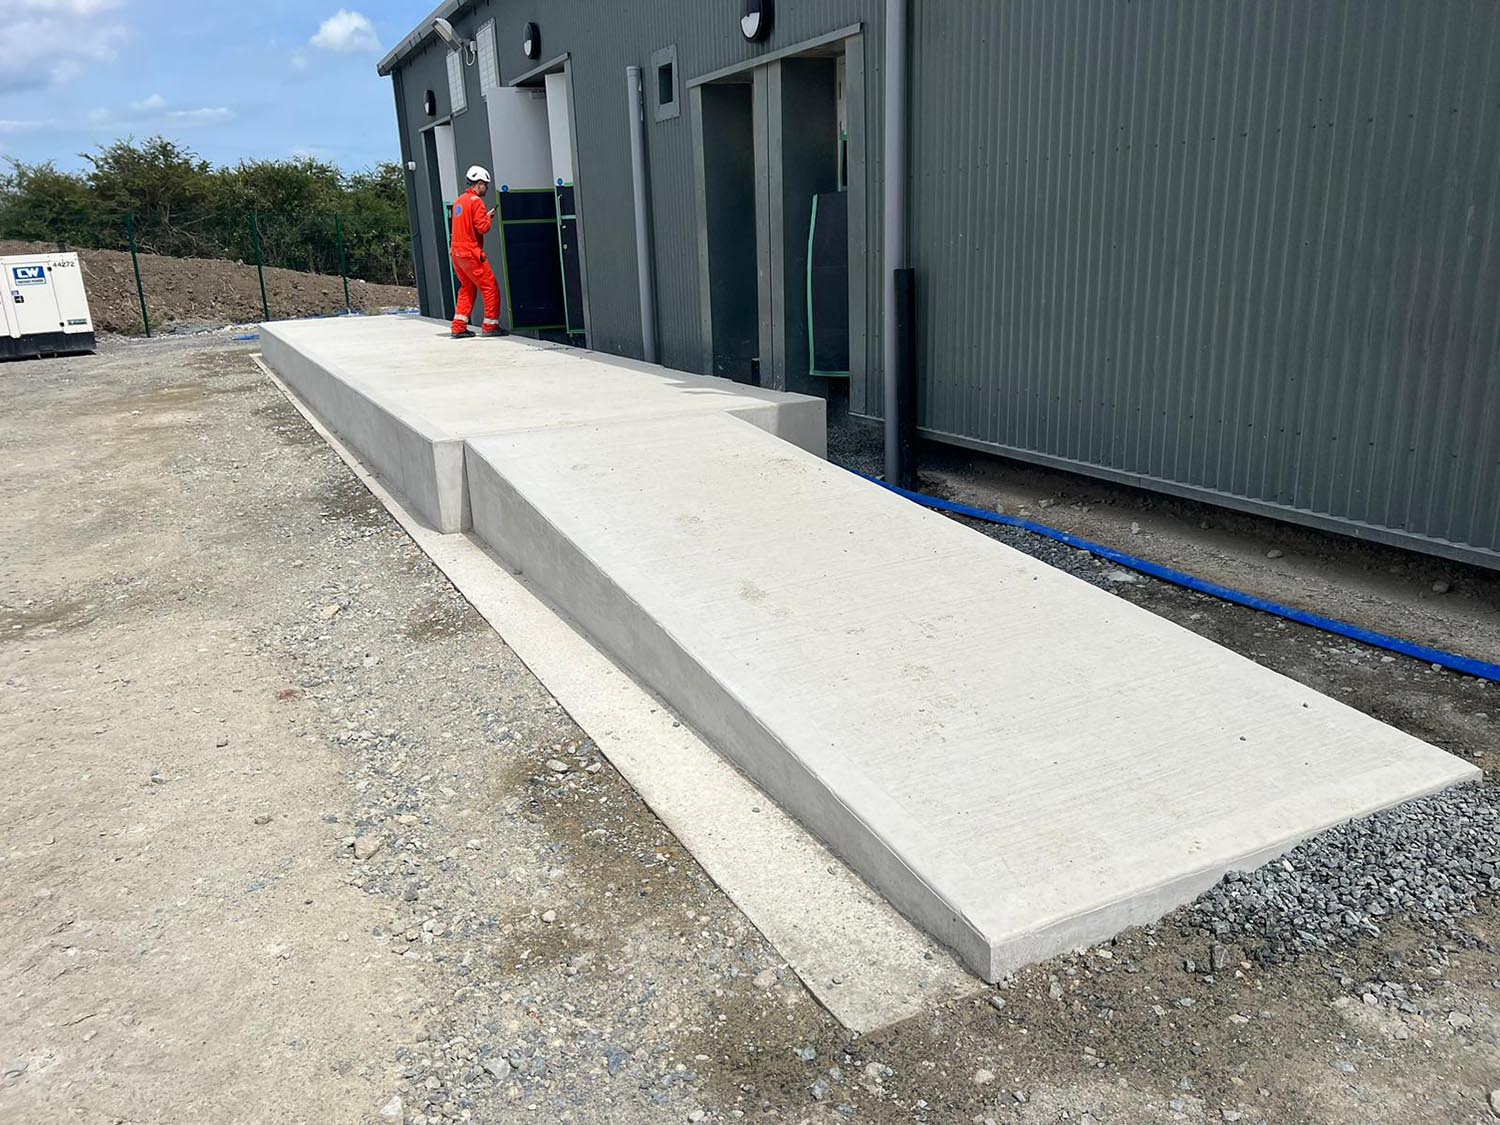 Richborough switch room ramp slab for a power station